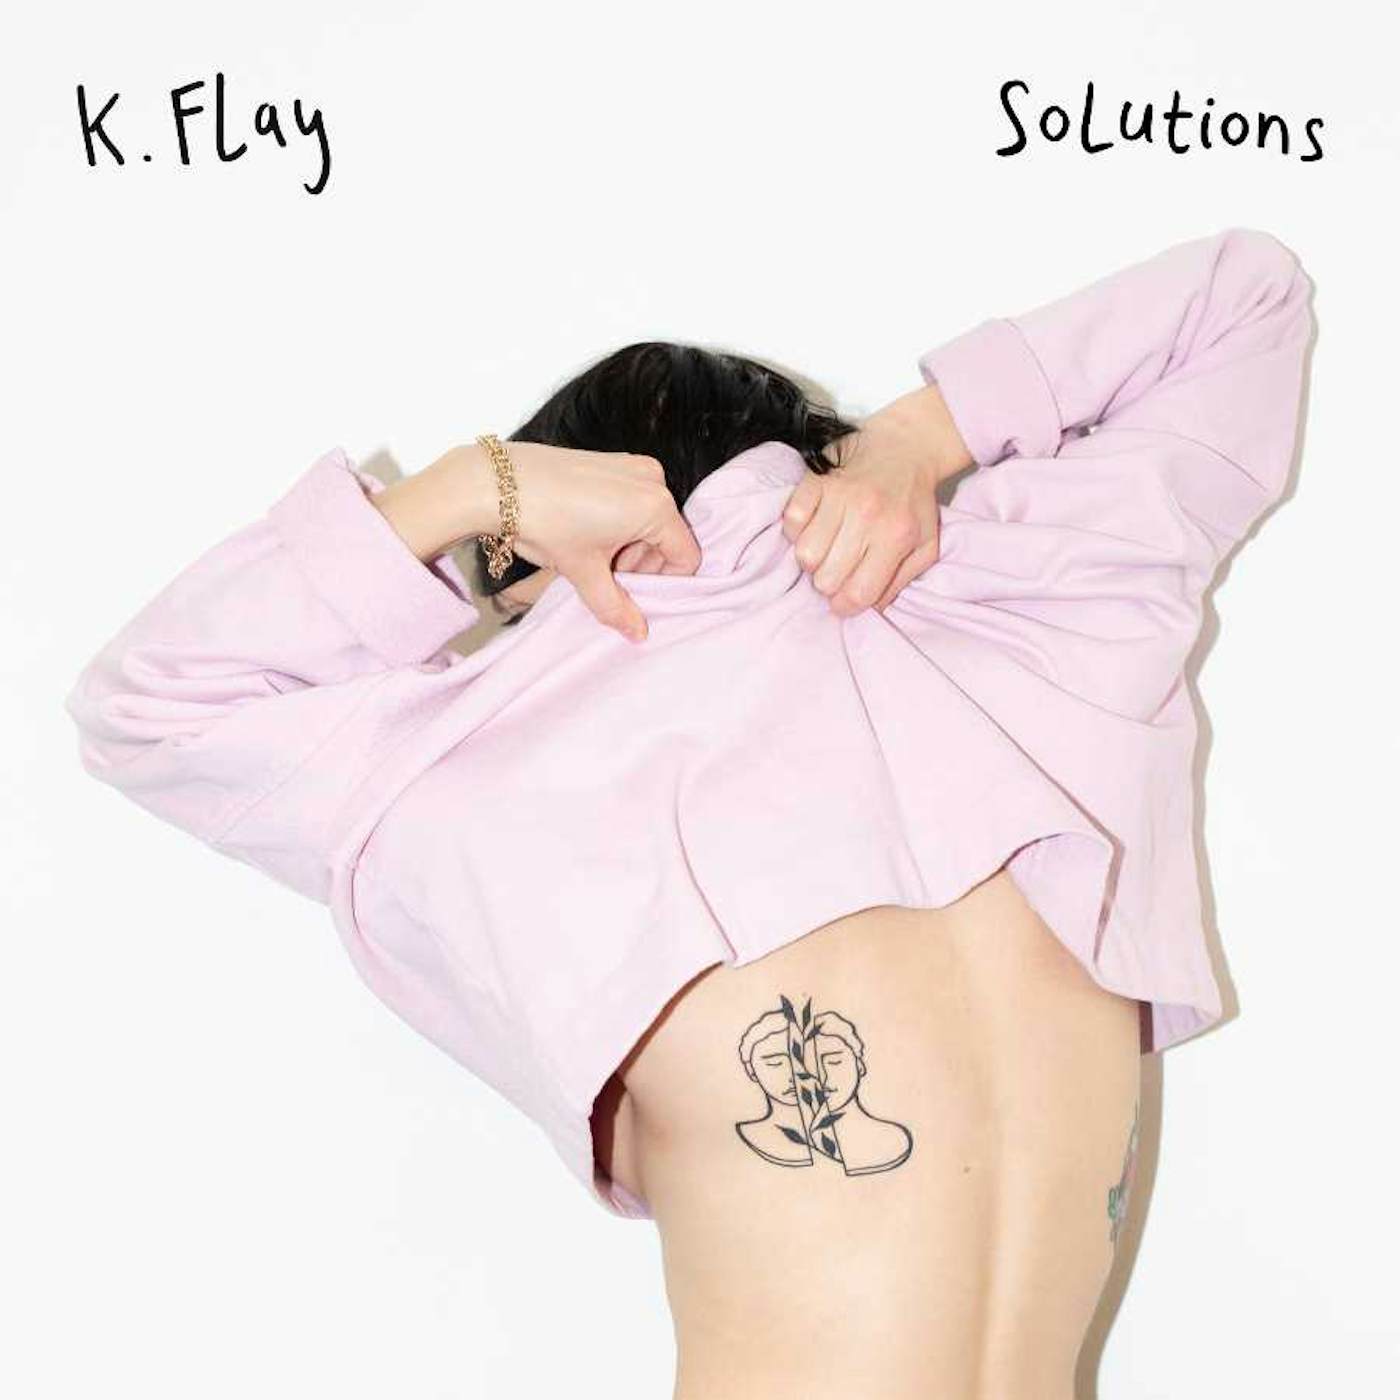 K.Flay SOLUTIONS CD